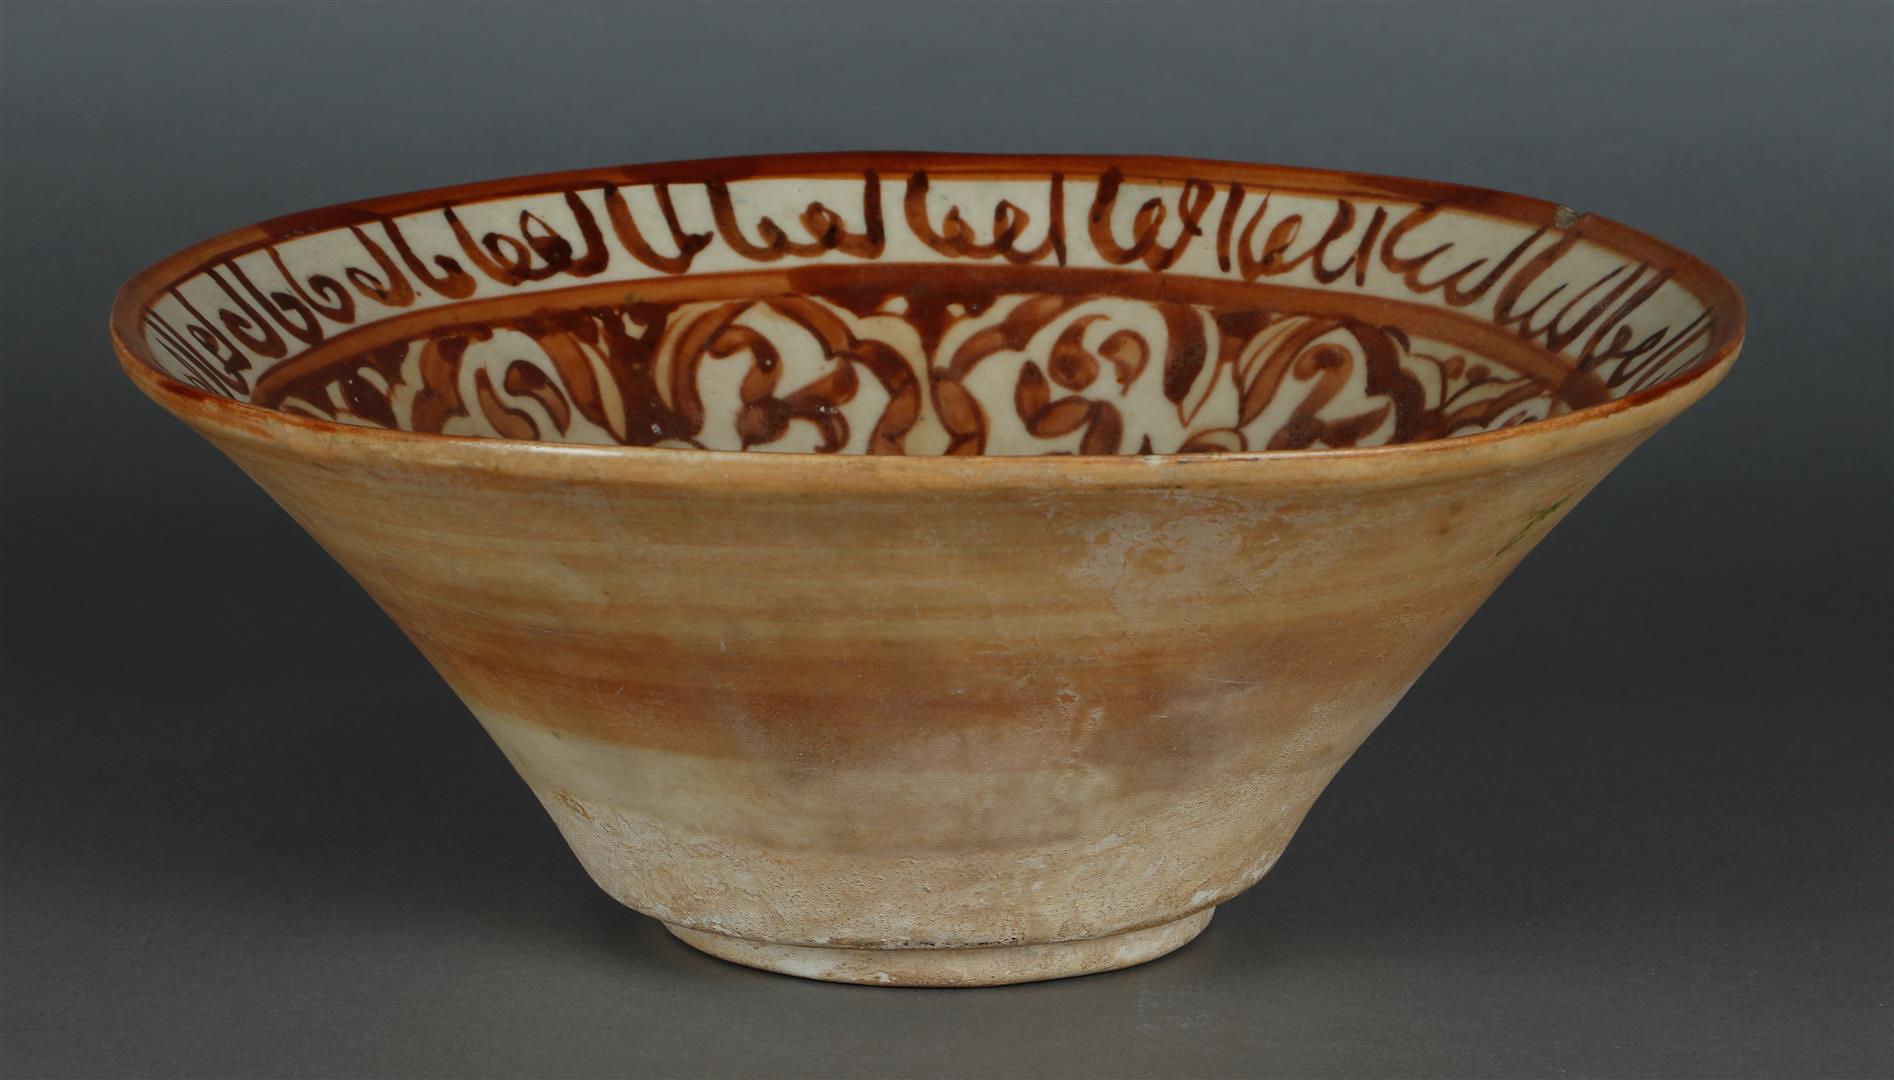 An earthenware nishapur bowl with floral decoration and decorated with a figure in the center. Persi